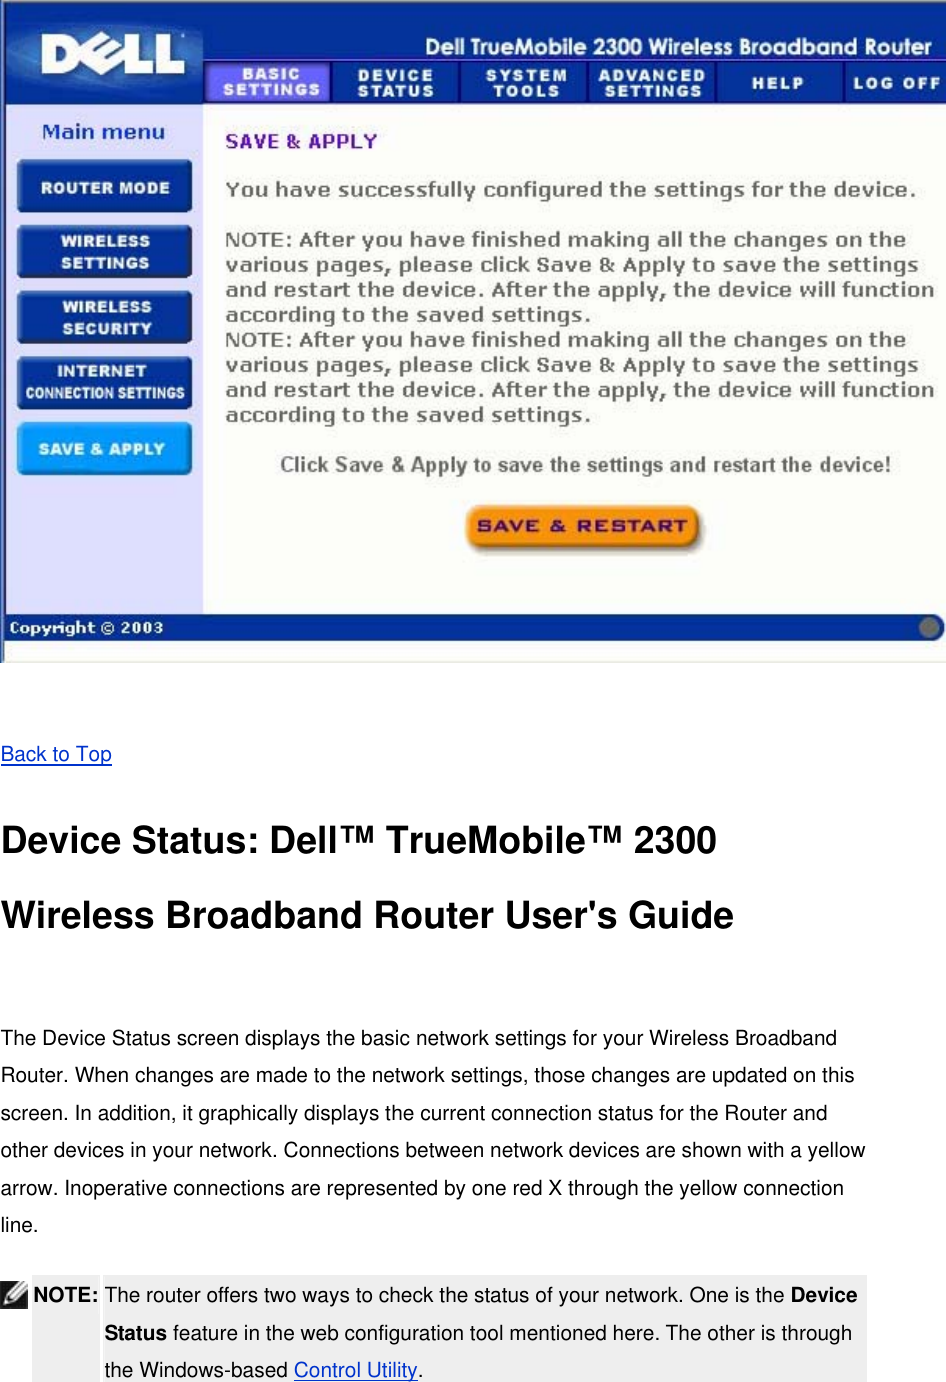   Back to Top Device Status: Dell™ TrueMobile™ 2300 Wireless Broadband Router User&apos;s Guide  The Device Status screen displays the basic network settings for your Wireless Broadband Router. When changes are made to the network settings, those changes are updated on this screen. In addition, it graphically displays the current connection status for the Router and other devices in your network. Connections between network devices are shown with a yellow arrow. Inoperative connections are represented by one red X through the yellow connection line.  NOTE: The router offers two ways to check the status of your network. One is the Device Status feature in the web configuration tool mentioned here. The other is through the Windows-based Control Utility.   